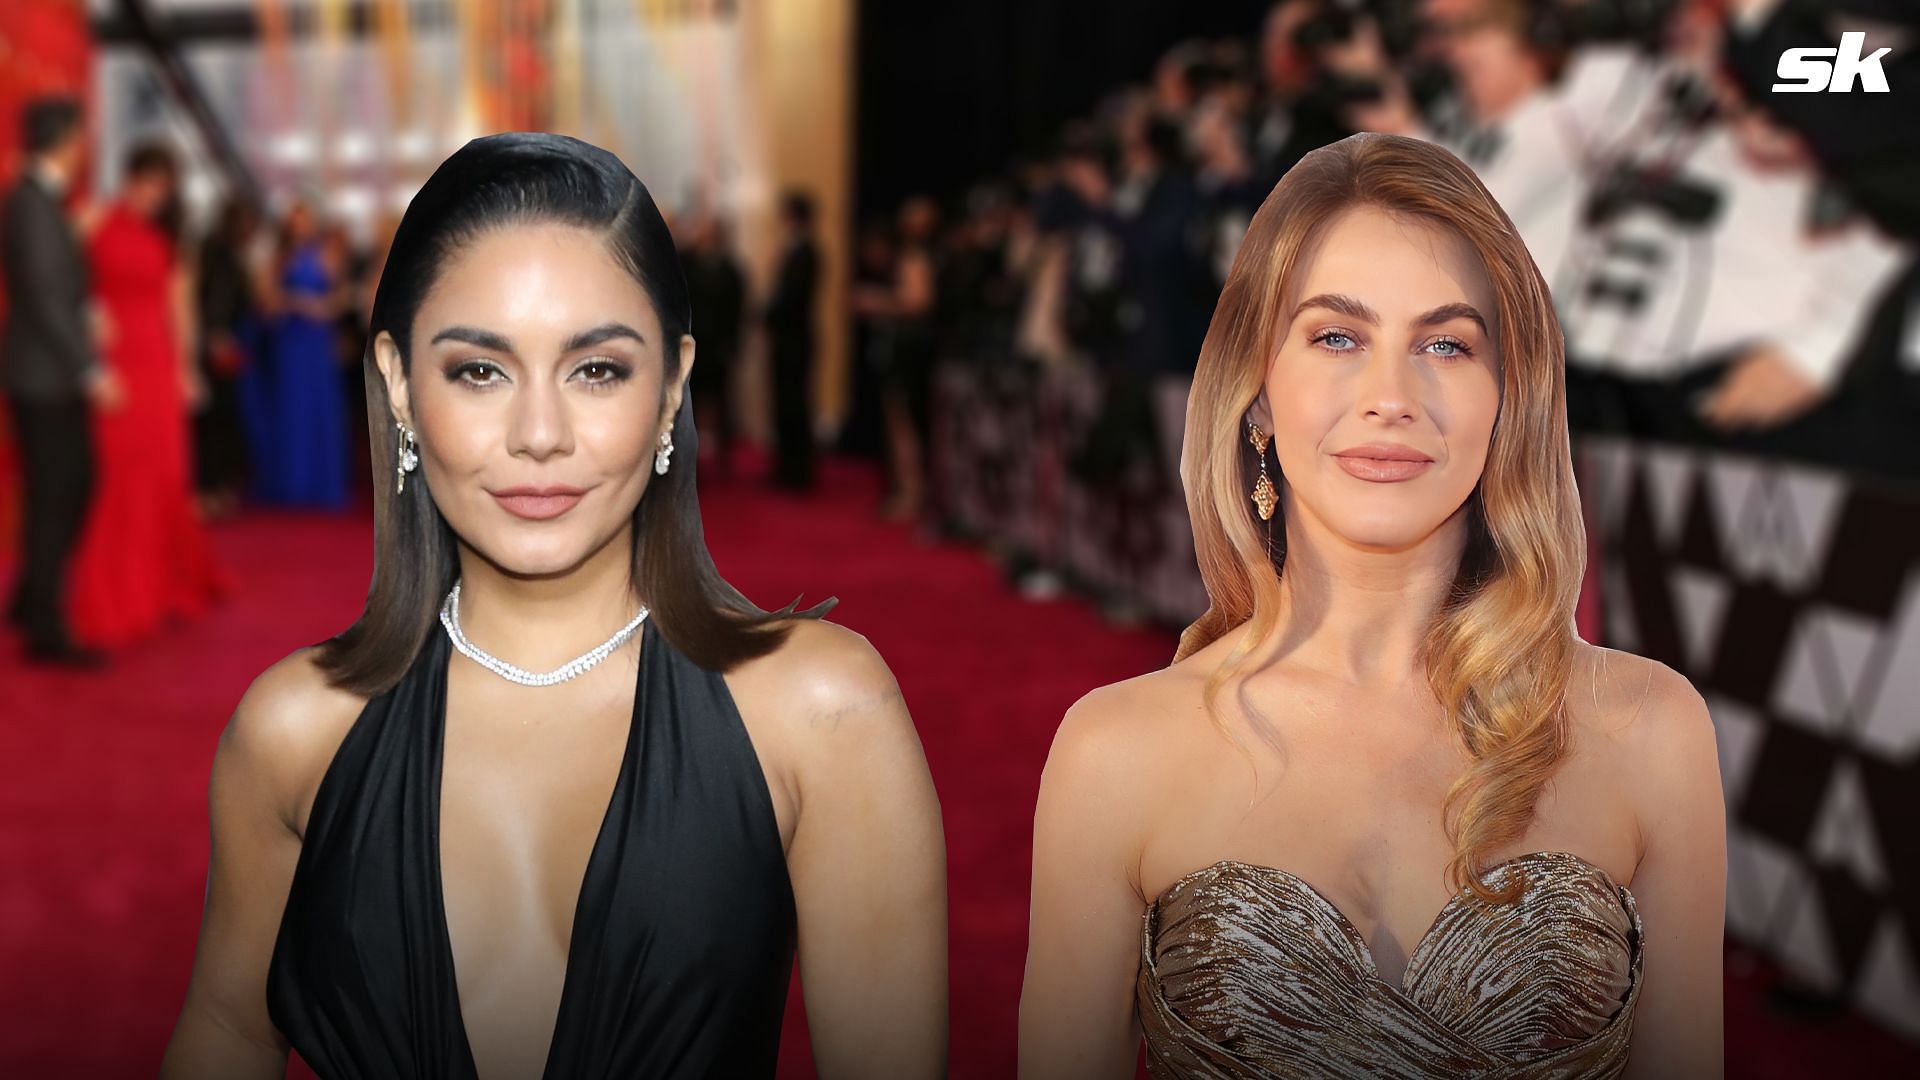 Vanessa Hudgens to host Oscar Red Carpet show with Julianne Hough